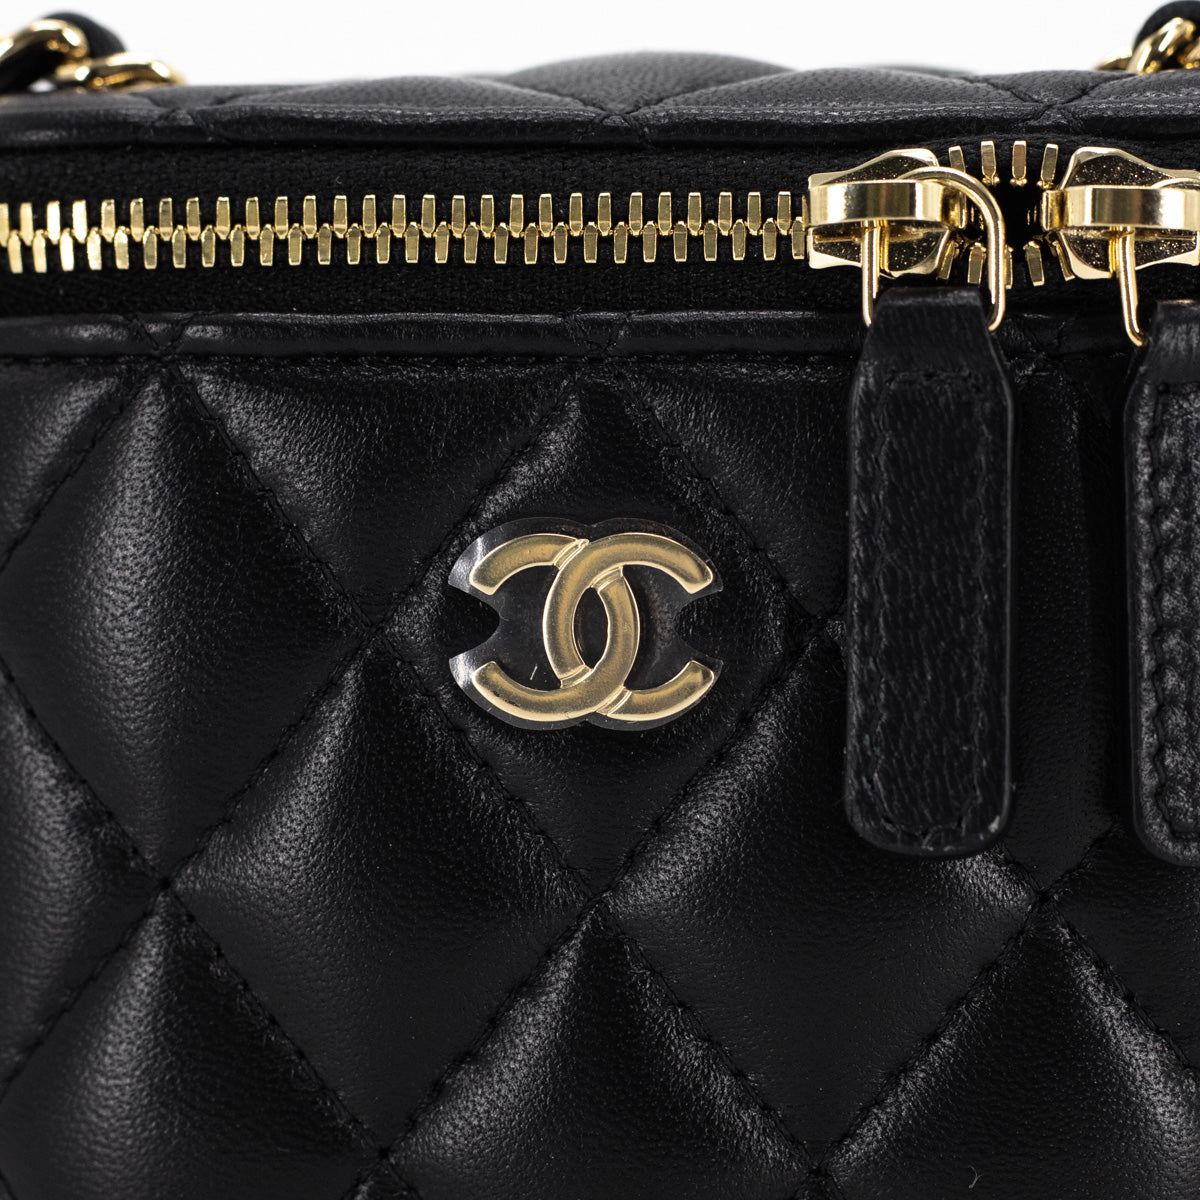 Chanel Extra Small Vanity Cases With Chain, Bragmybag